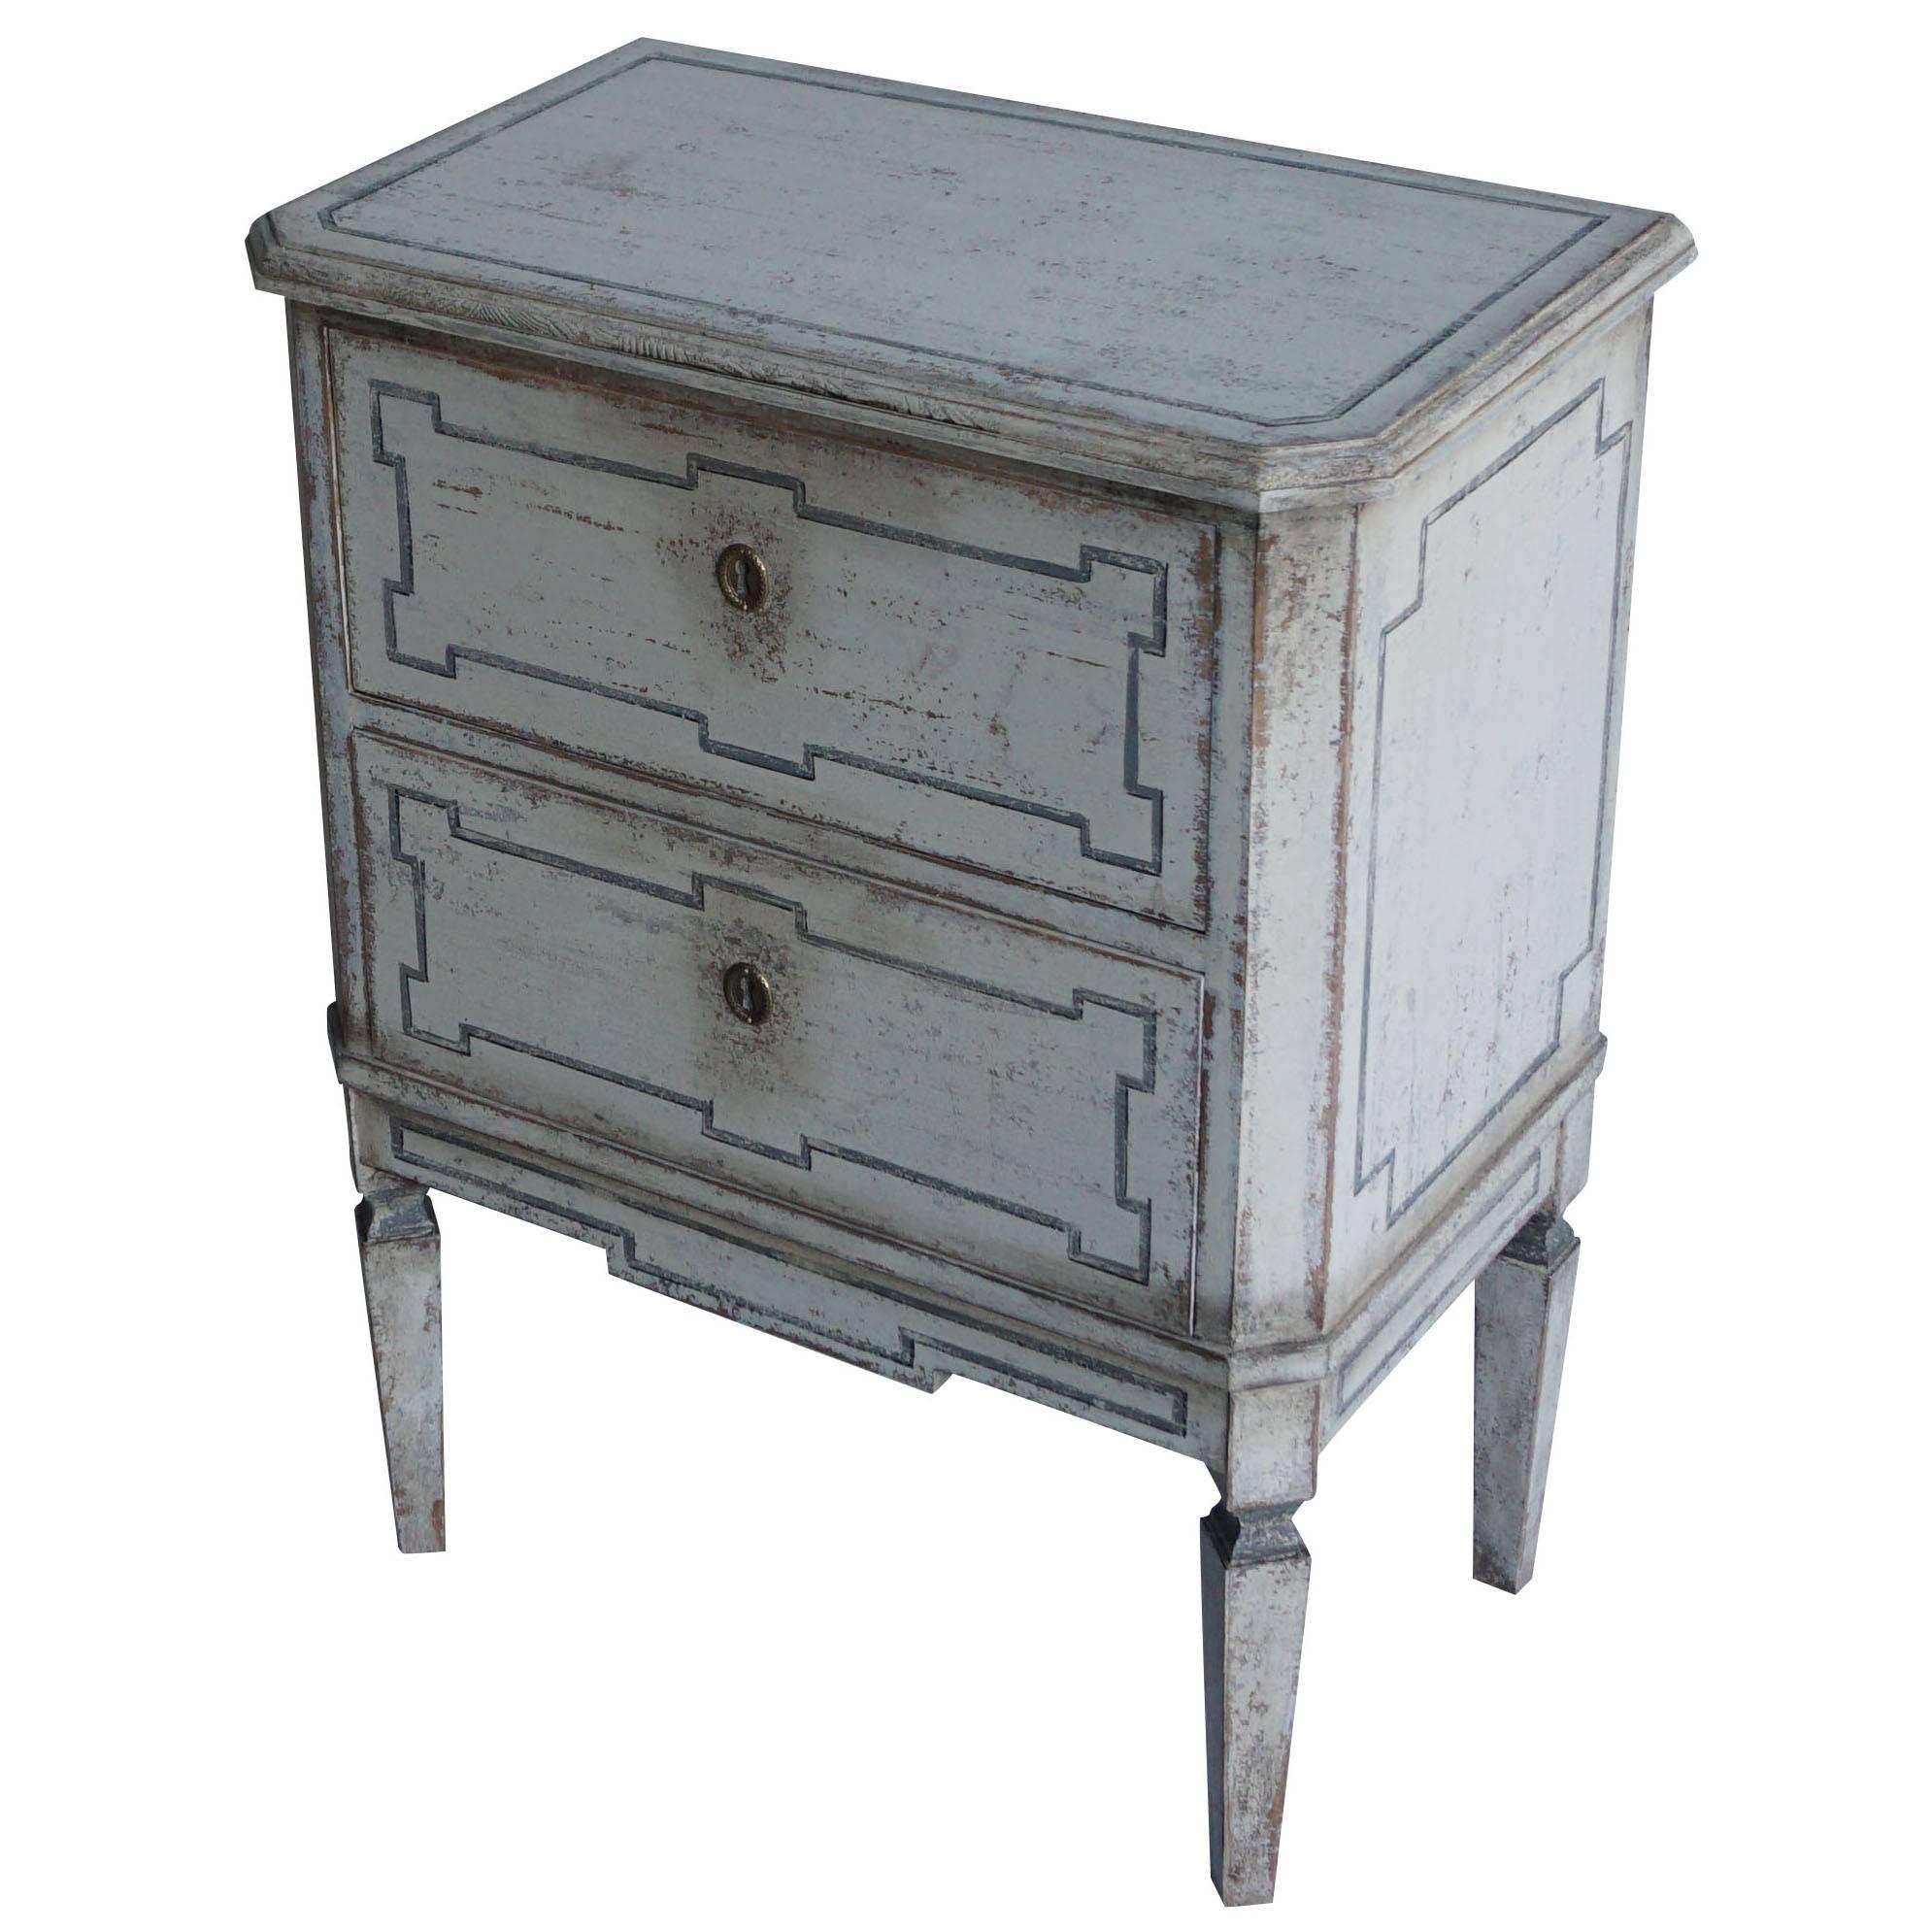 A small pair of late 19th century Gustavian painted commode chest of two drawers, slanted corners, standing on tapered legs,
circa 1880 Sweden., Scandinavia.